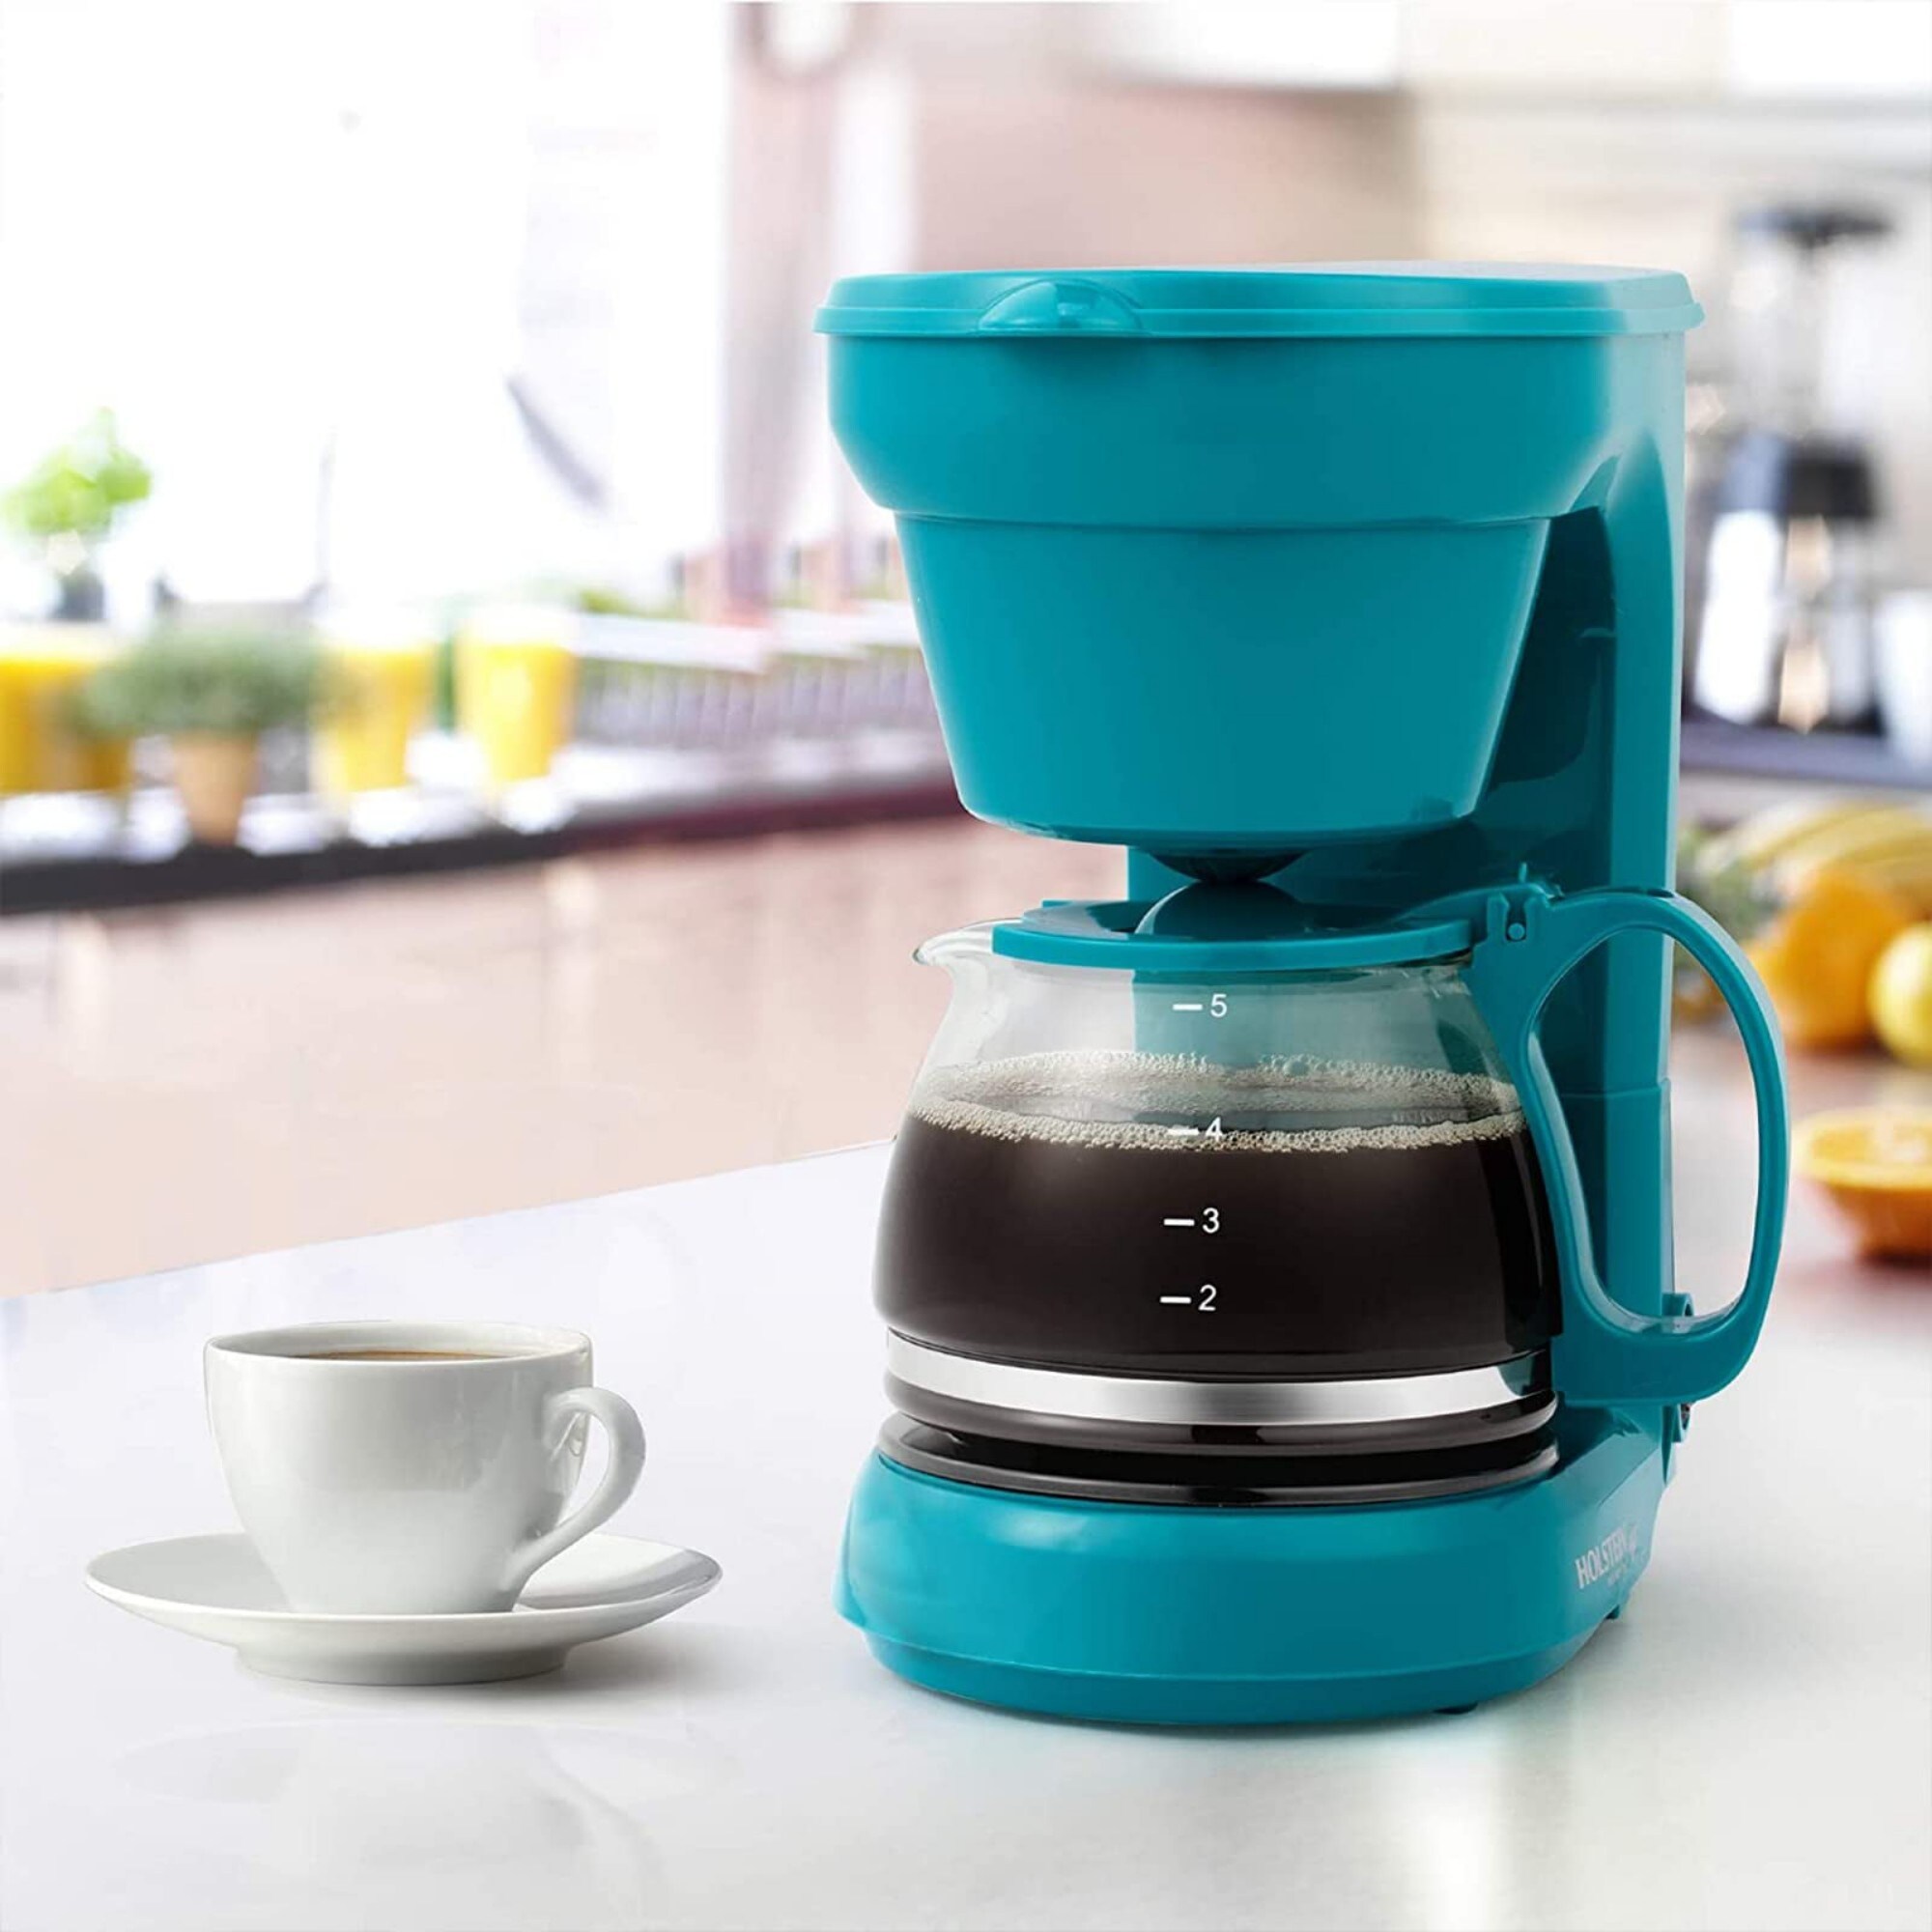 https://ak1.ostkcdn.com/images/products/is/images/direct/1e3484717a8117a50b7498783b2b2cbf694970b2/5CUP-Coffee-Maker---Space-Saving-Design%2C-Auto-Pause-and-Serve%2C-Removable-Filter-Basket%2C-BLACK.jpg